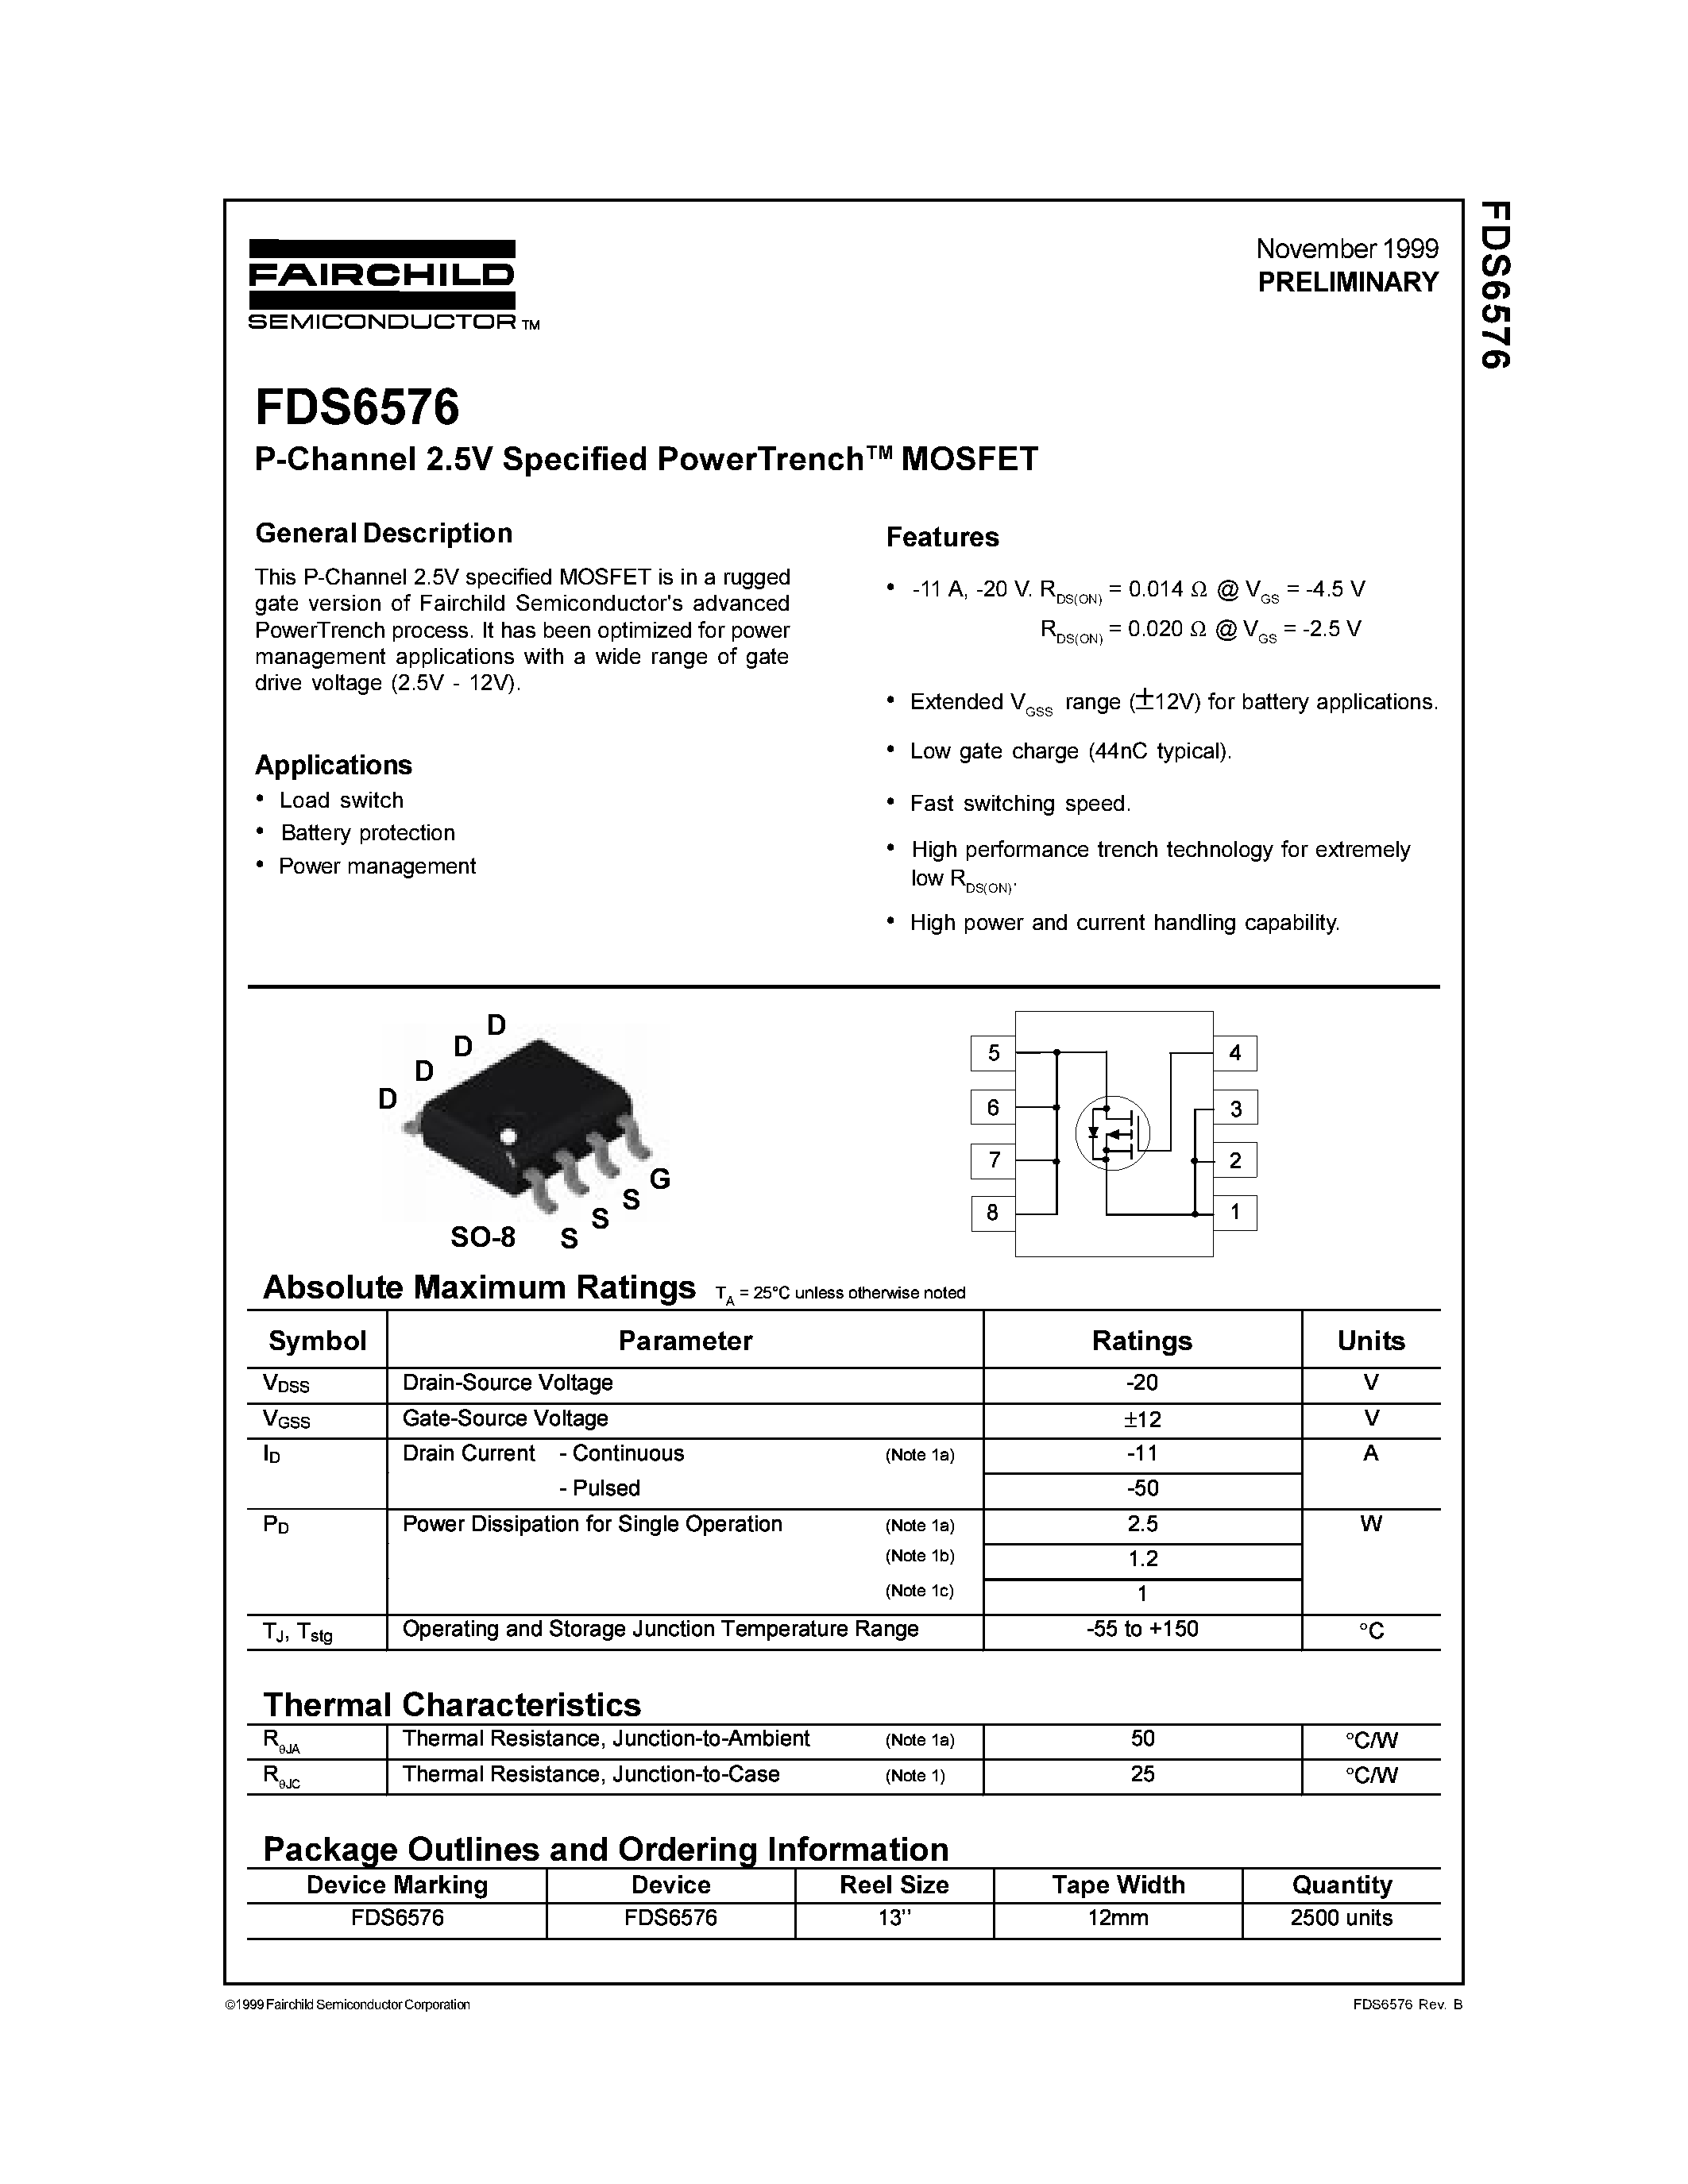 Даташит FDS6576 - P-Channel 2.5V Specified PowerTrenchTM MOSFET страница 1